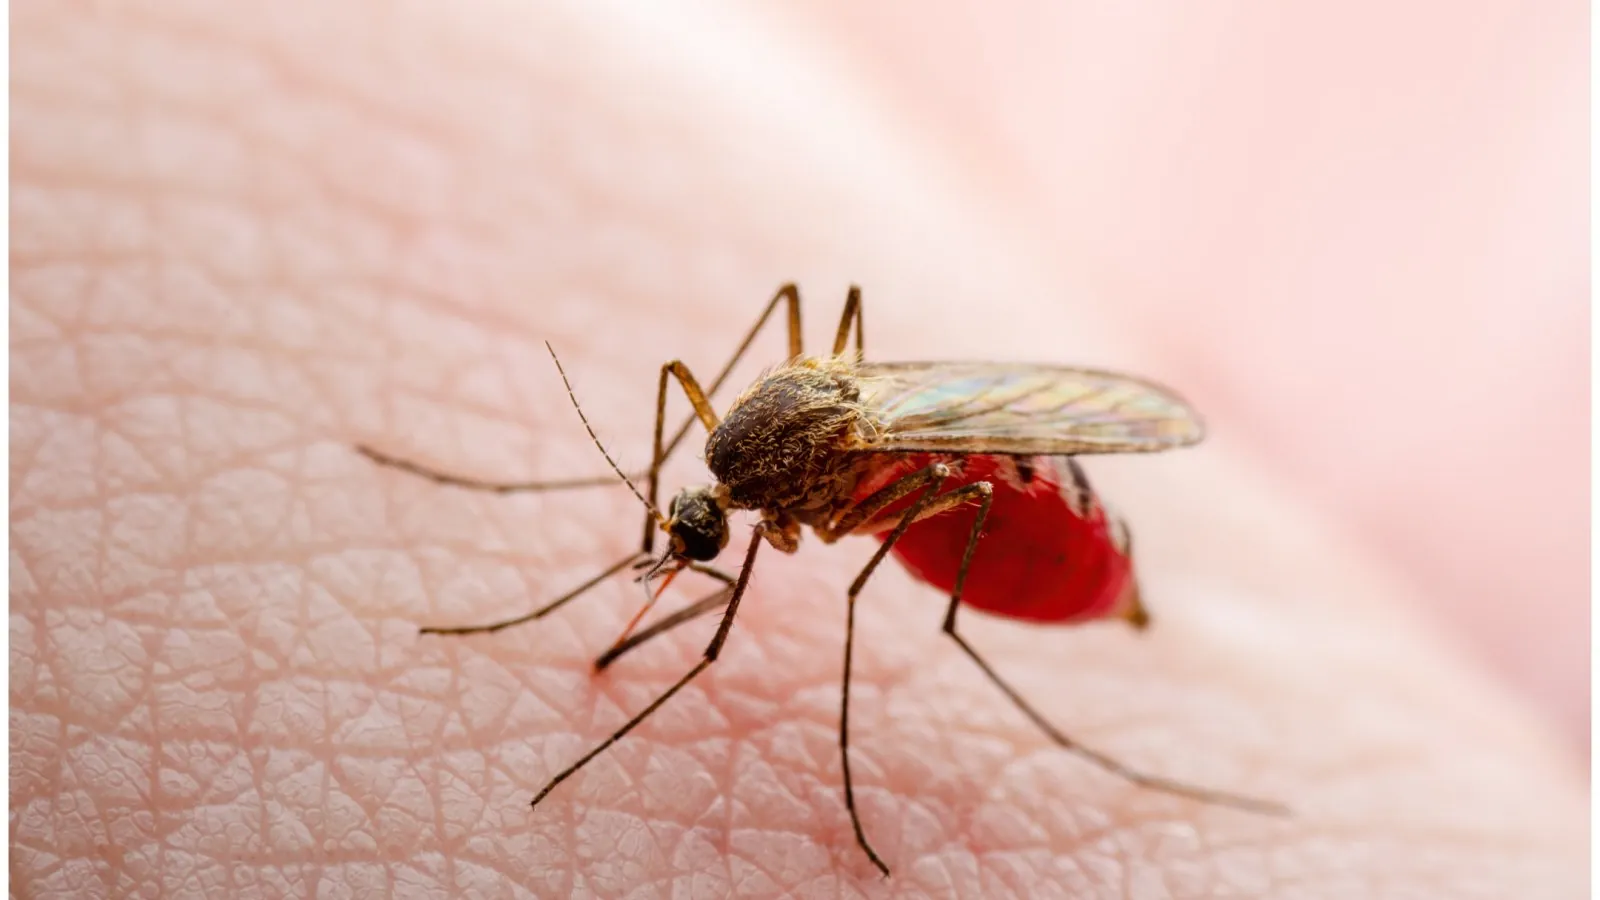 A young girl in Alabama died as a result of a mosquito bite